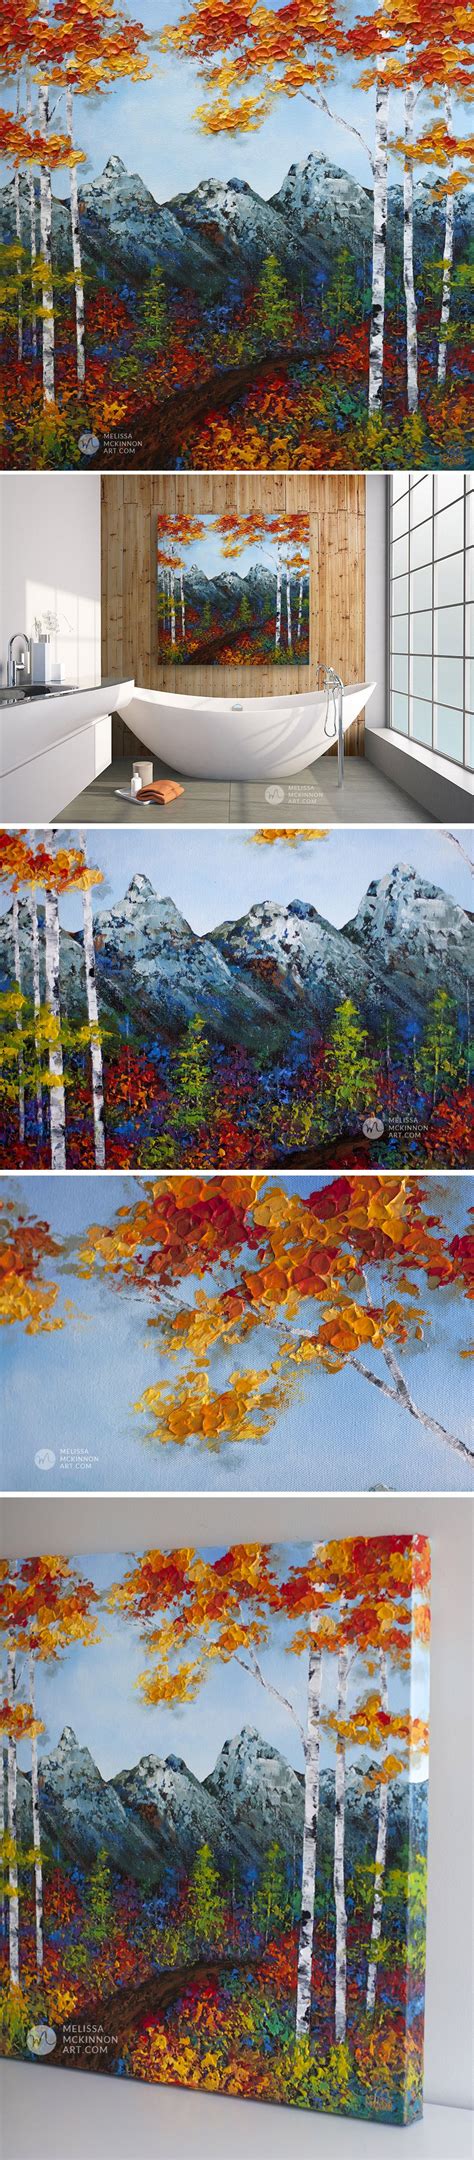 Melissa Mckinnon Artist New Collection Of Original Paintings And Fine